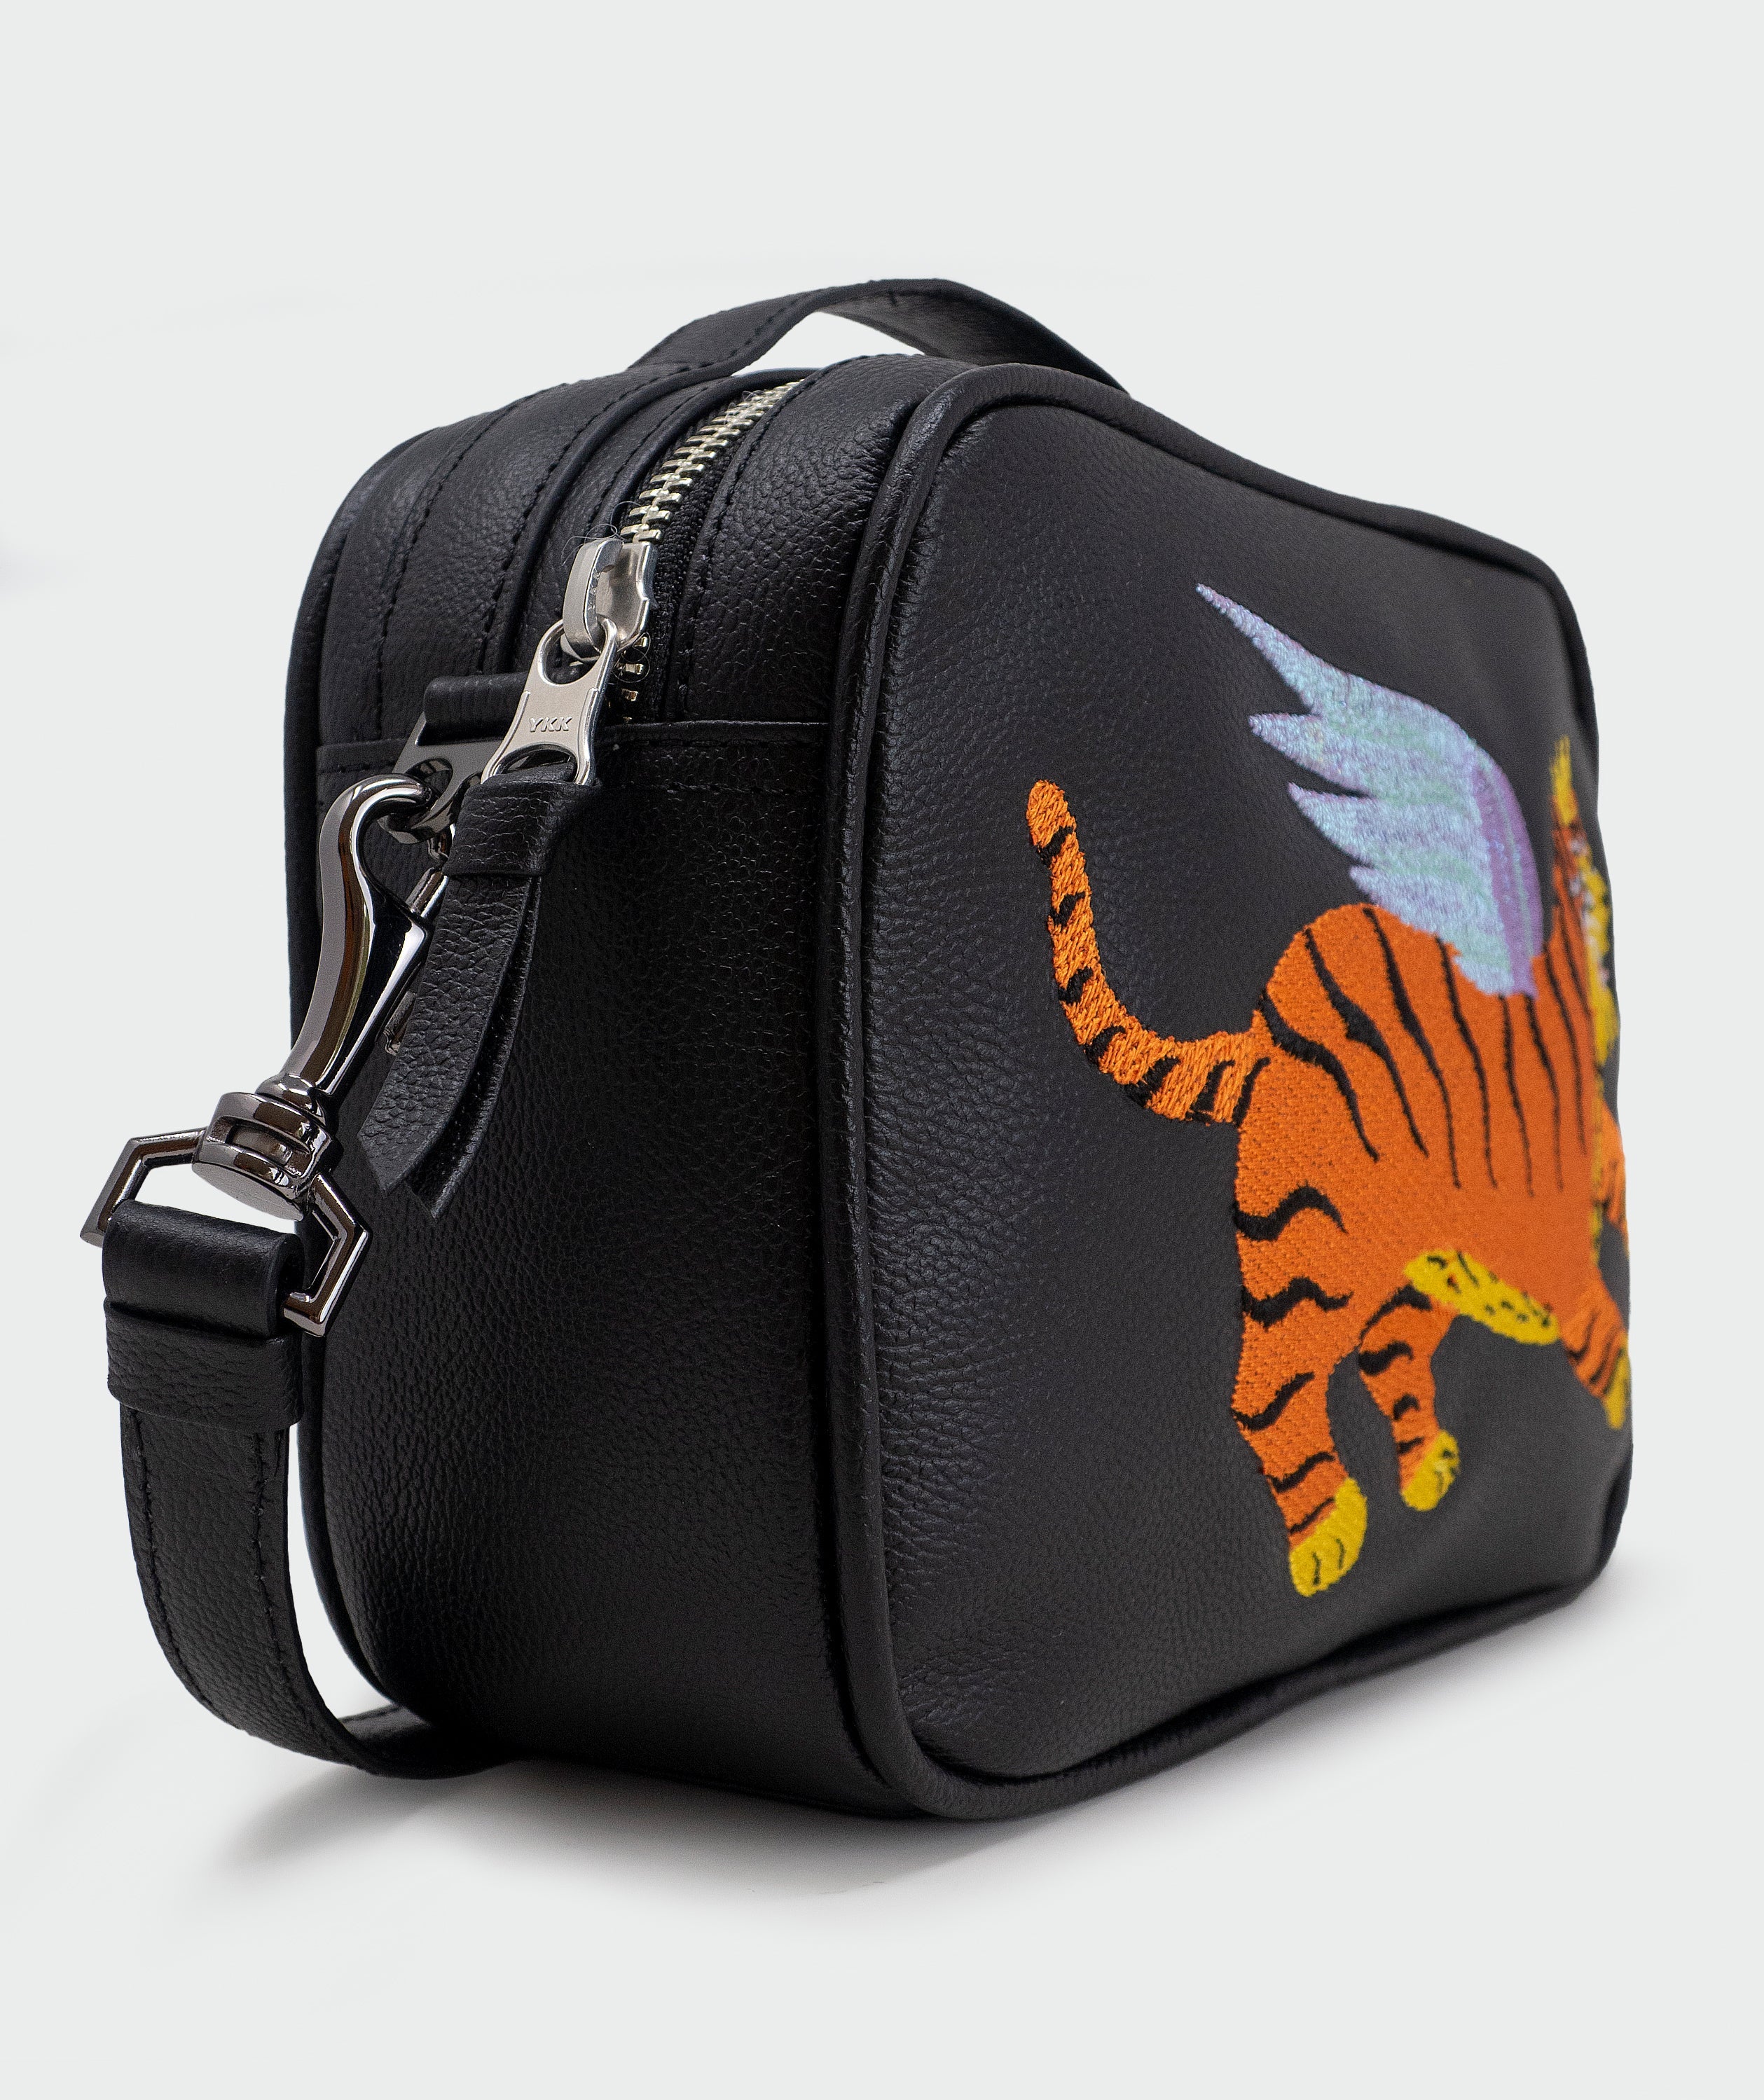 Black Leather Box Bag: Tiger Wings Embroidery | NYC Slow Fashion- Side view